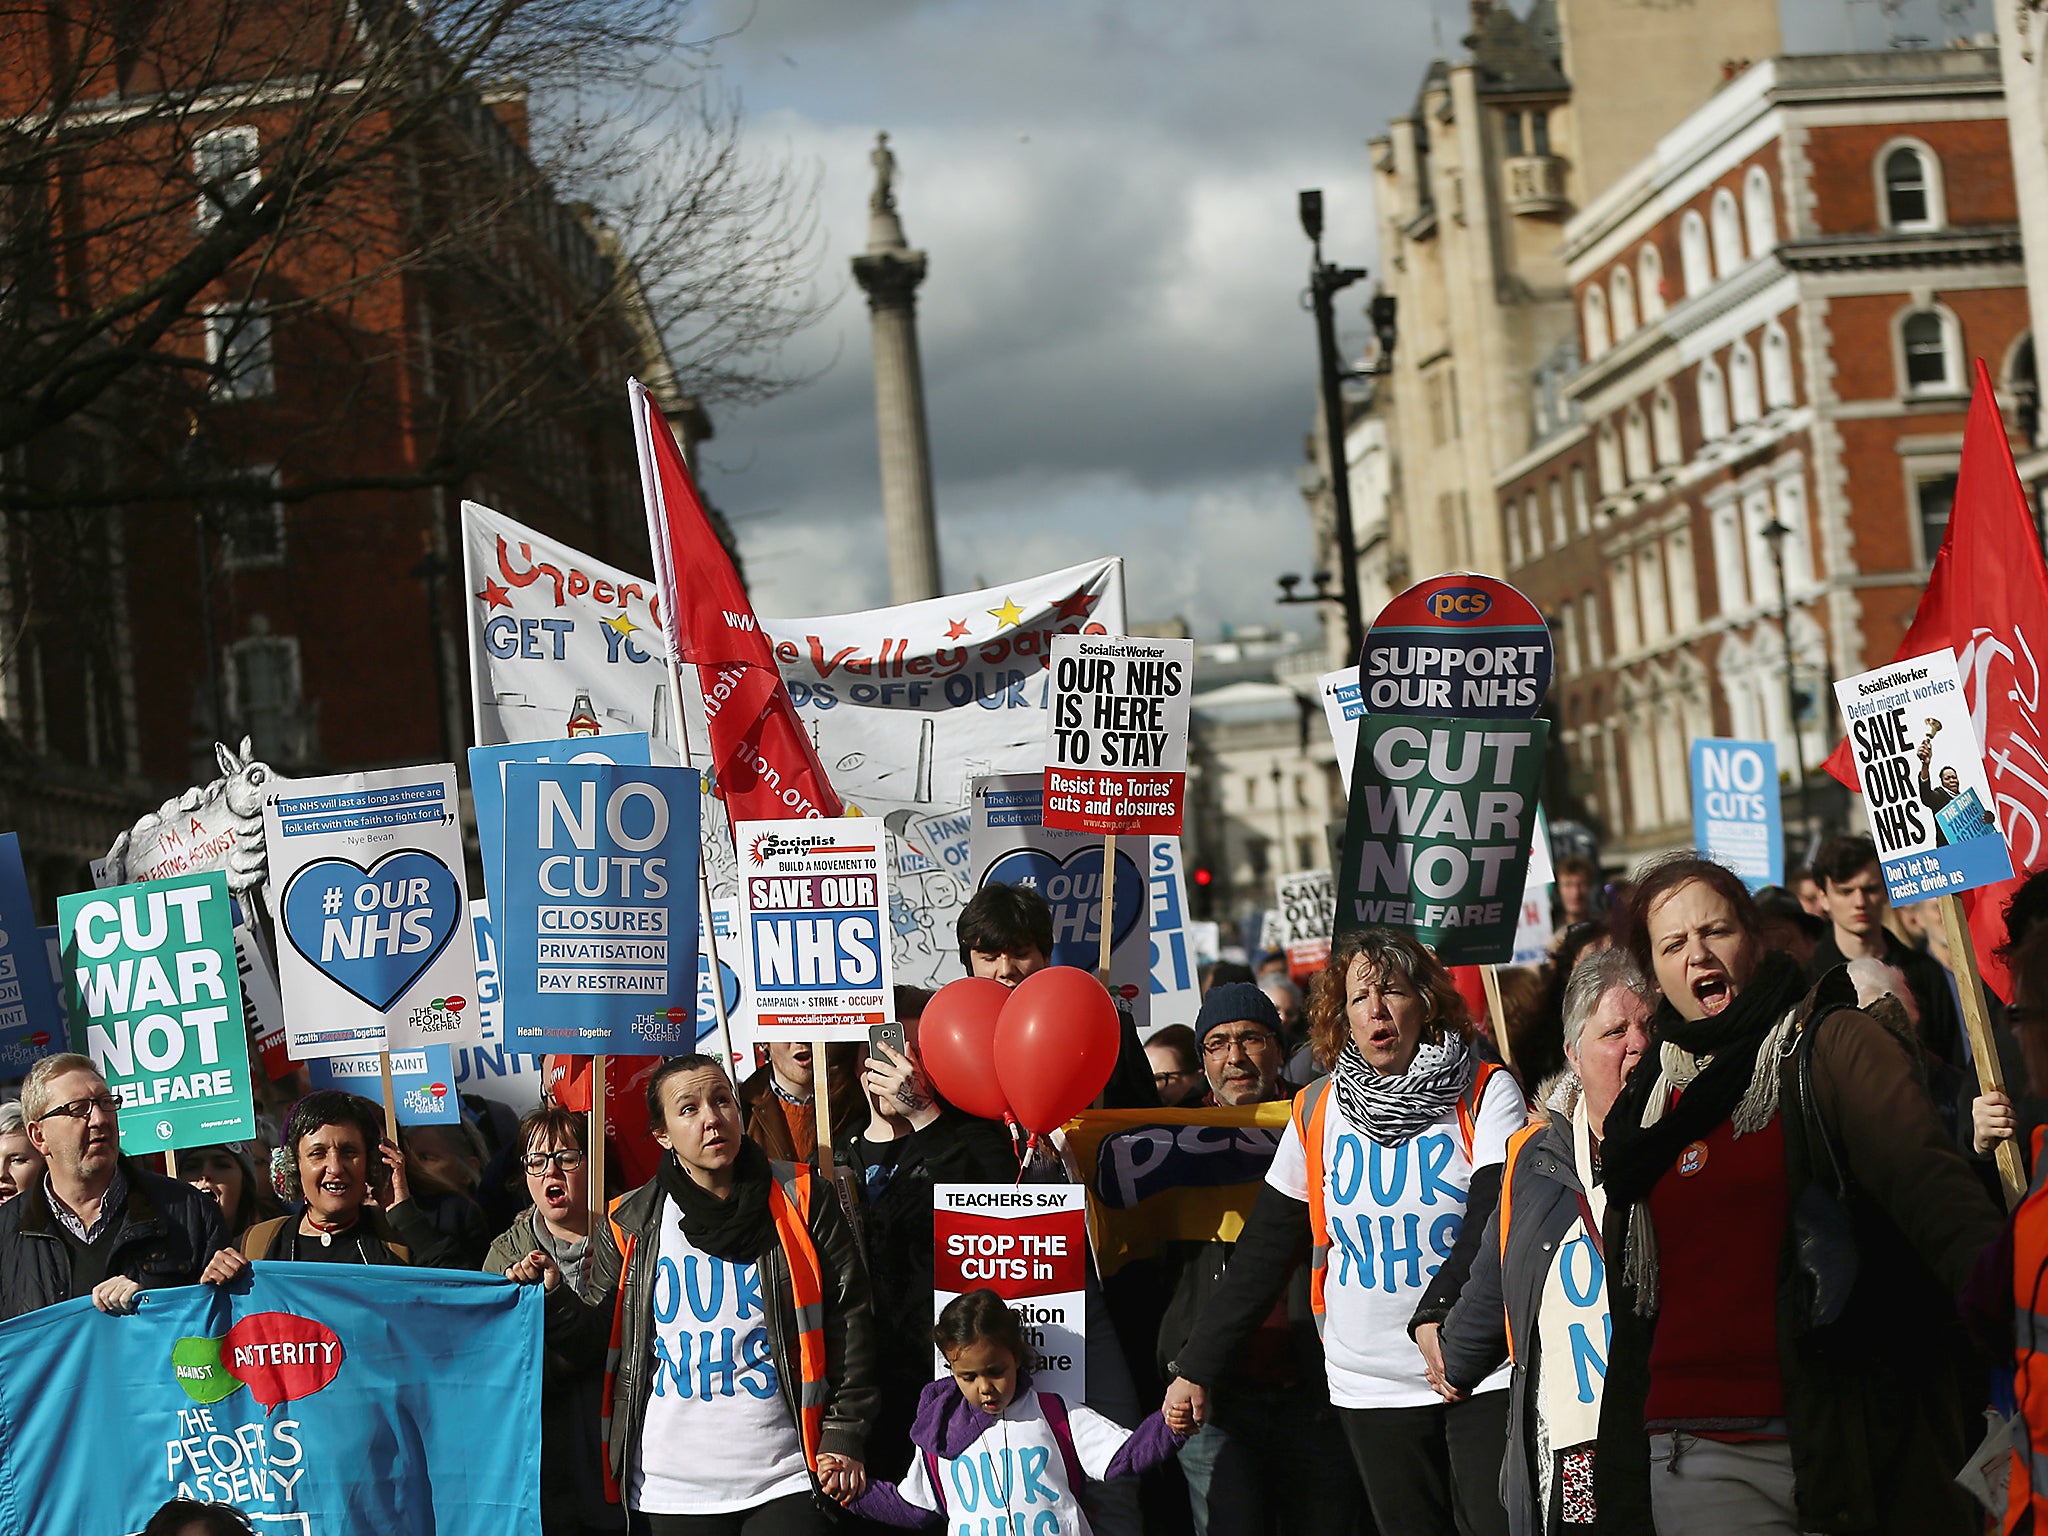 People take part in a demonstration to demand more funding for Britain's National Health Service (NHS), in London